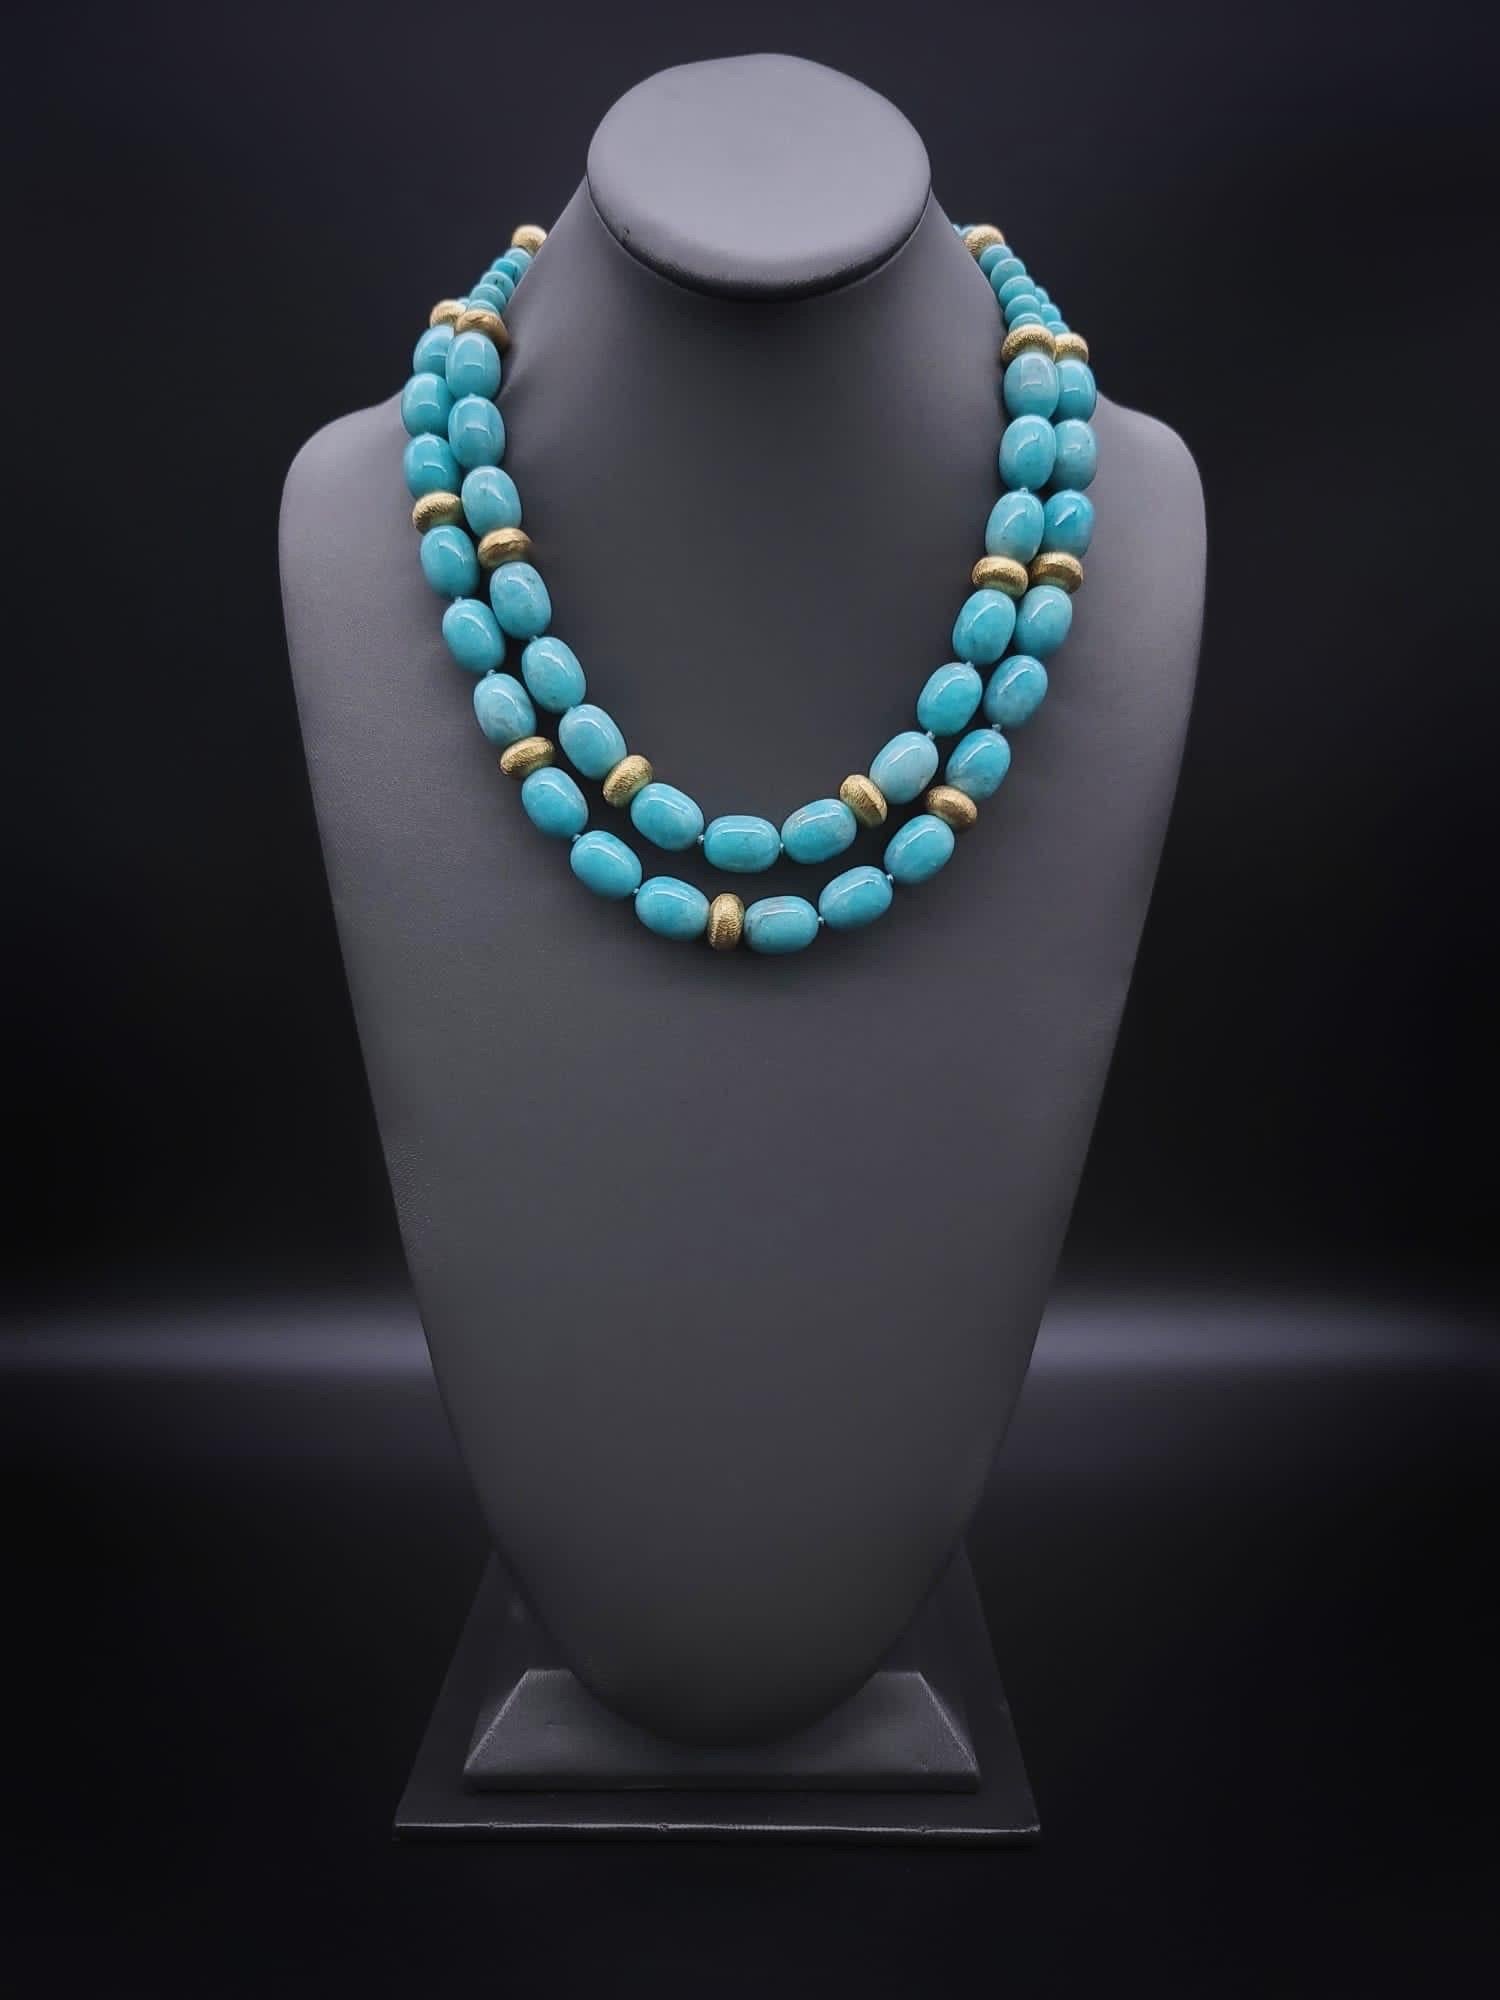 One-of-a-Kind
Polished Amazonite two strands necklace. The necklace is accented with brushed vermeil rondels oval beads in a double strand.
Amazonite, a rich Verdigris (green/ blue) stone known for the depth of its color and named for the Amazon